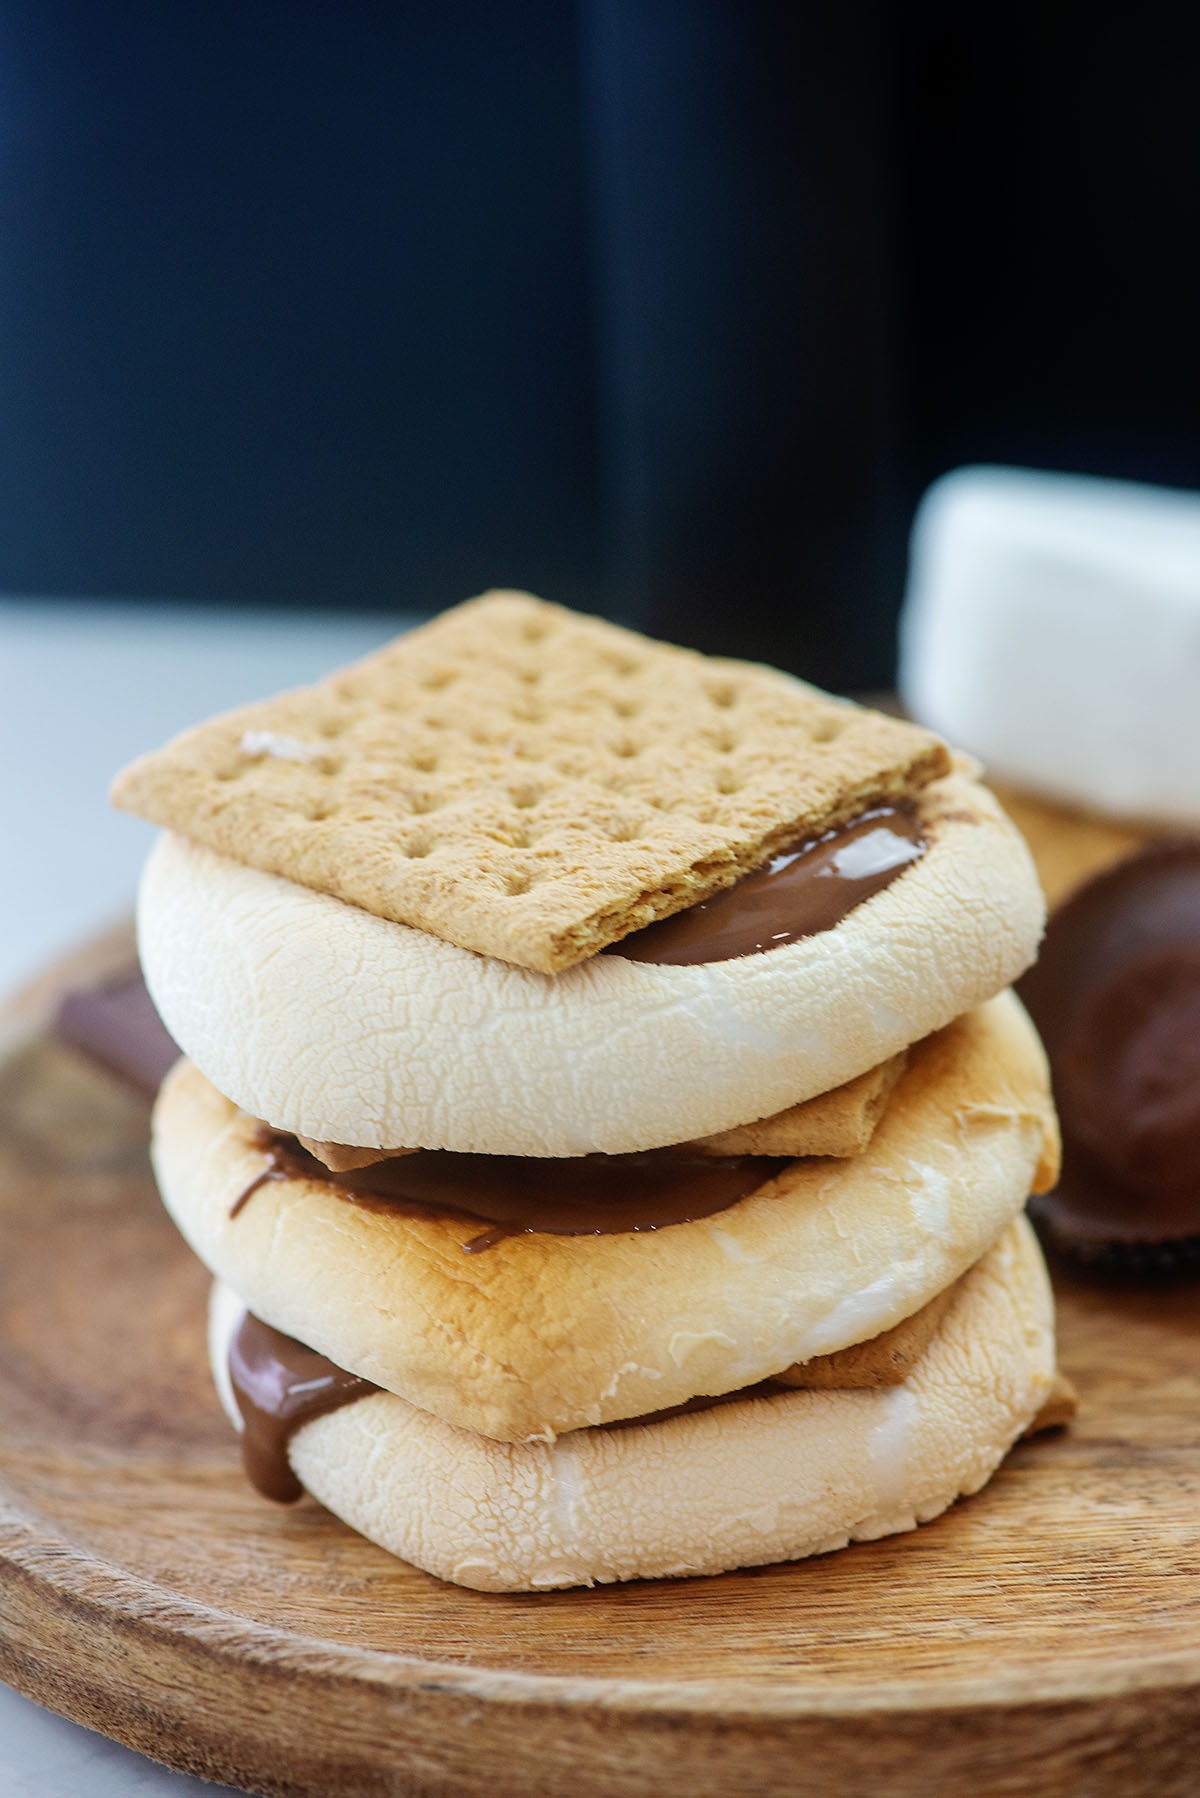 Stacked s'mores on a wooden plate